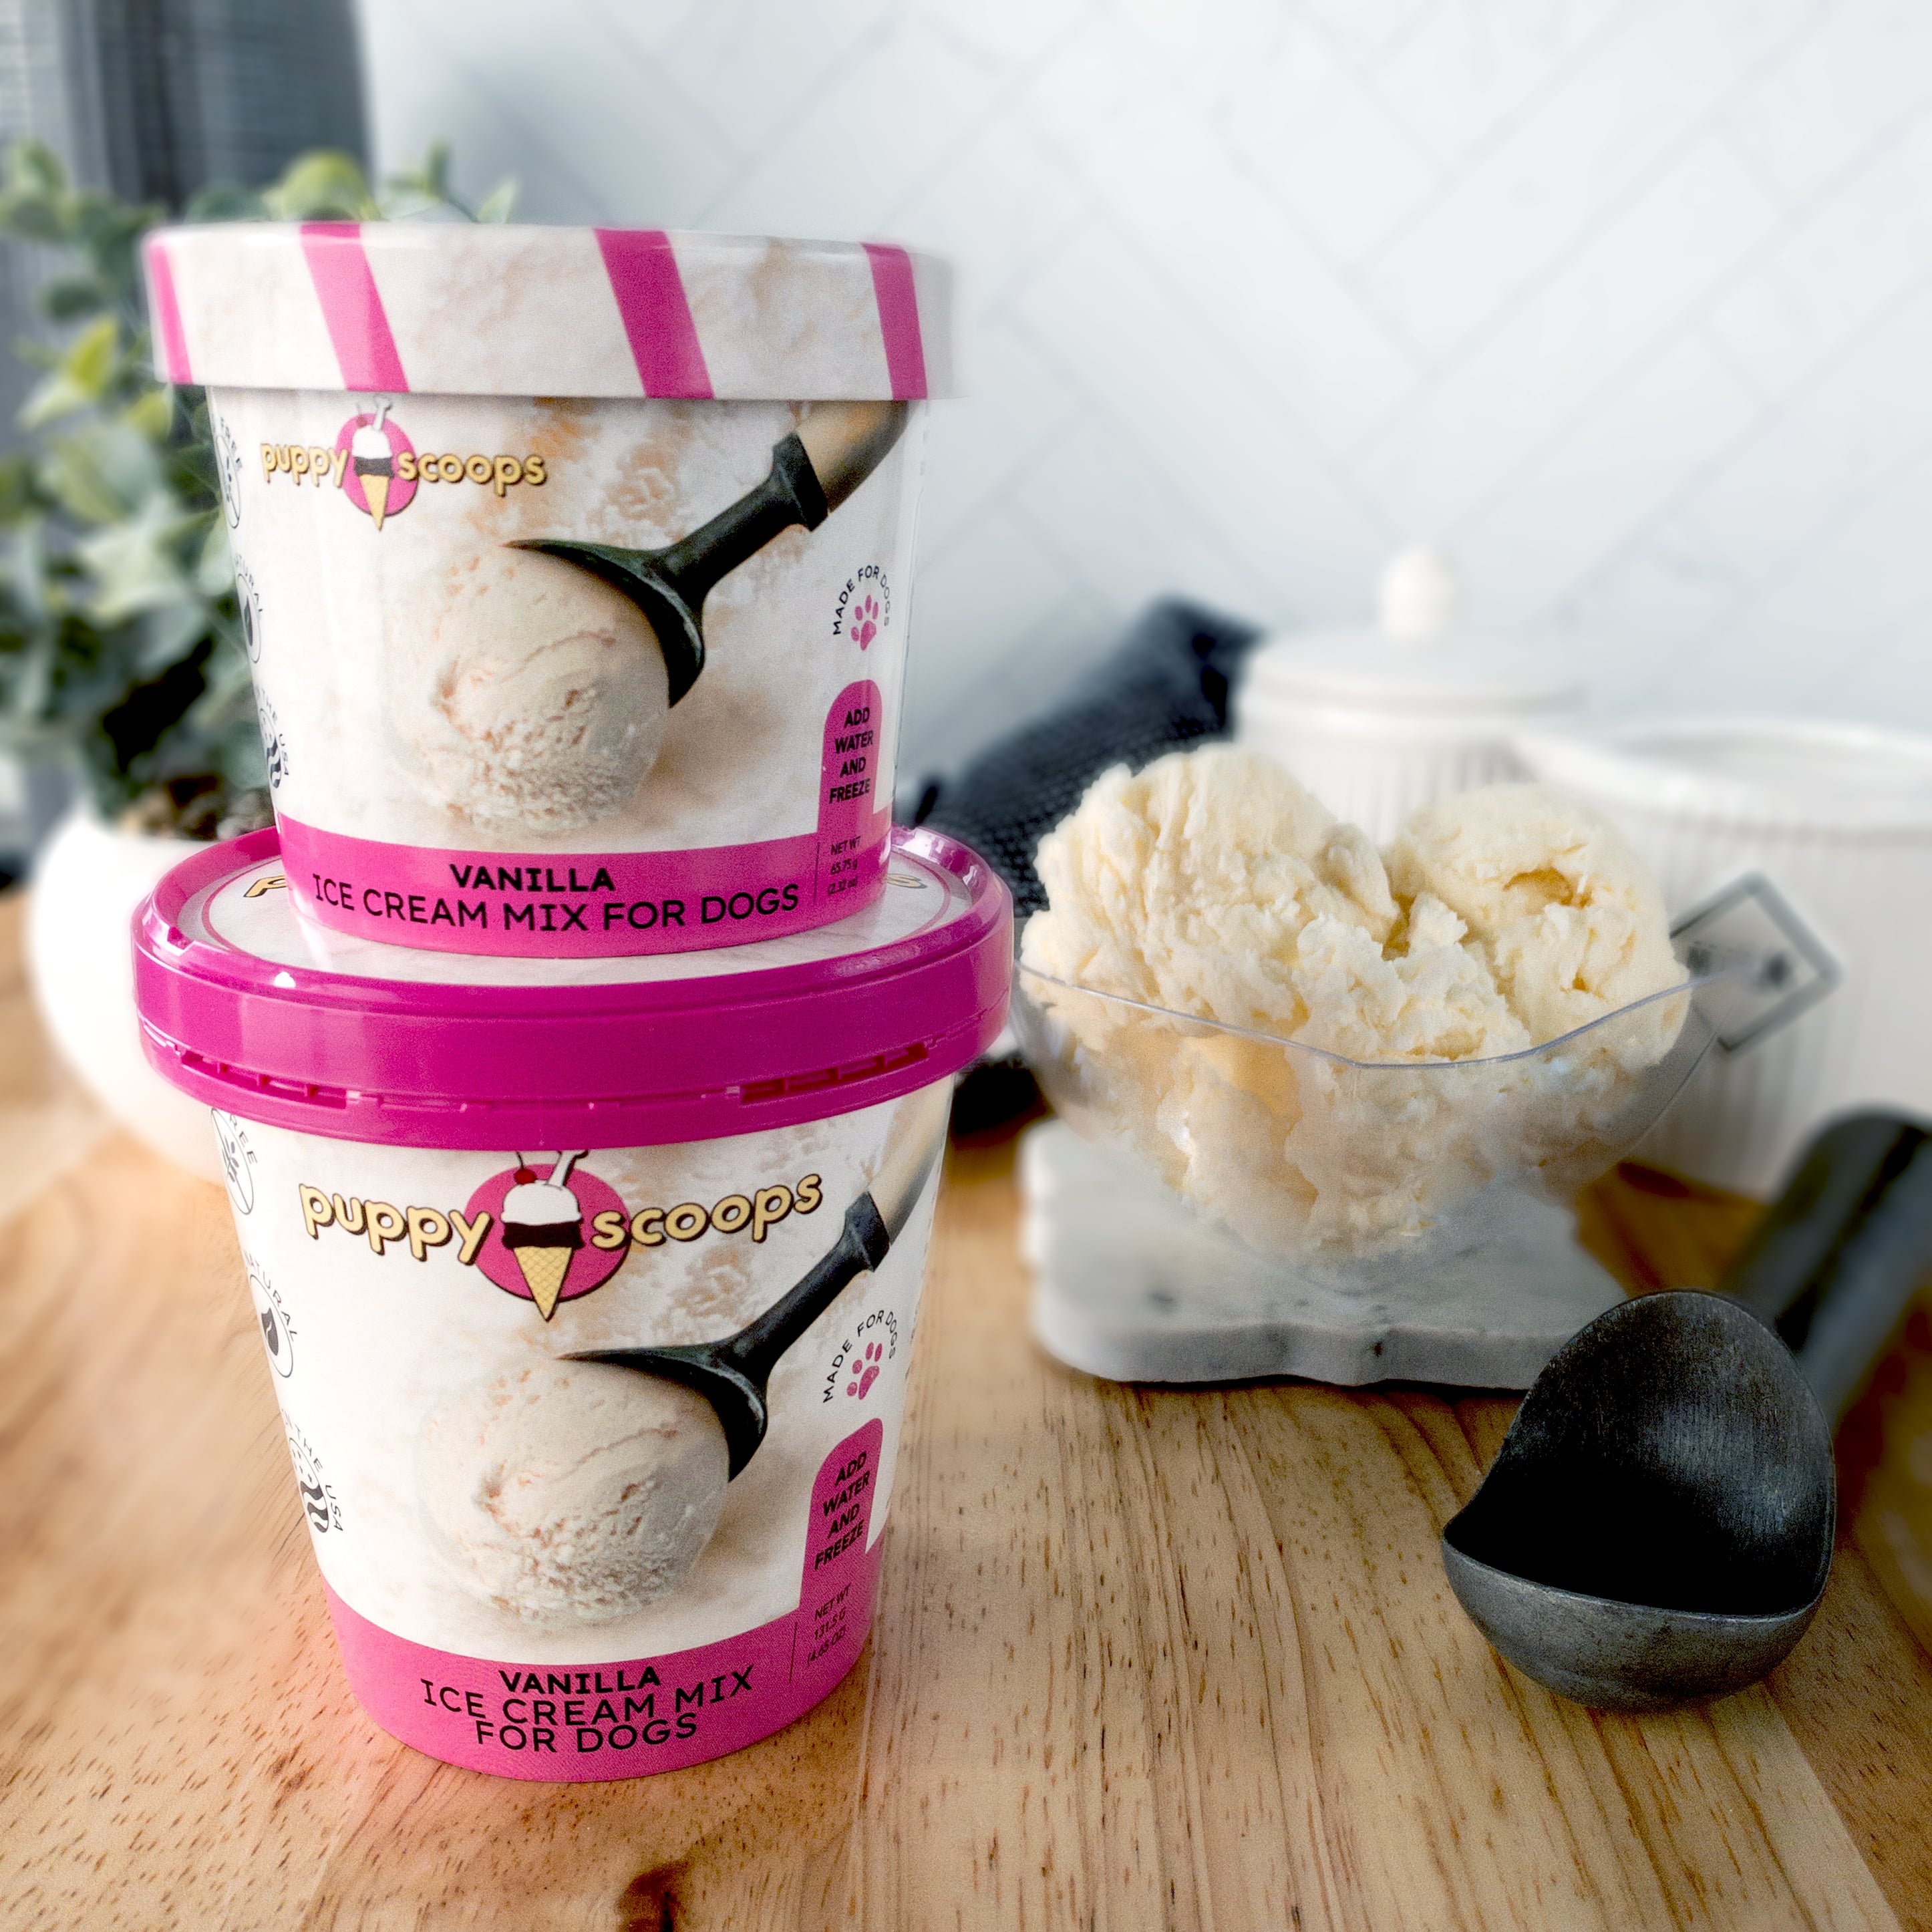  Puppy Scoops Dog Ice Cream Mix - Just Add Water and Freeze at  Home, Powder Mix with Ice Cream Cup and Reusable Lid, Variety Pack of 4  Pints of Ice